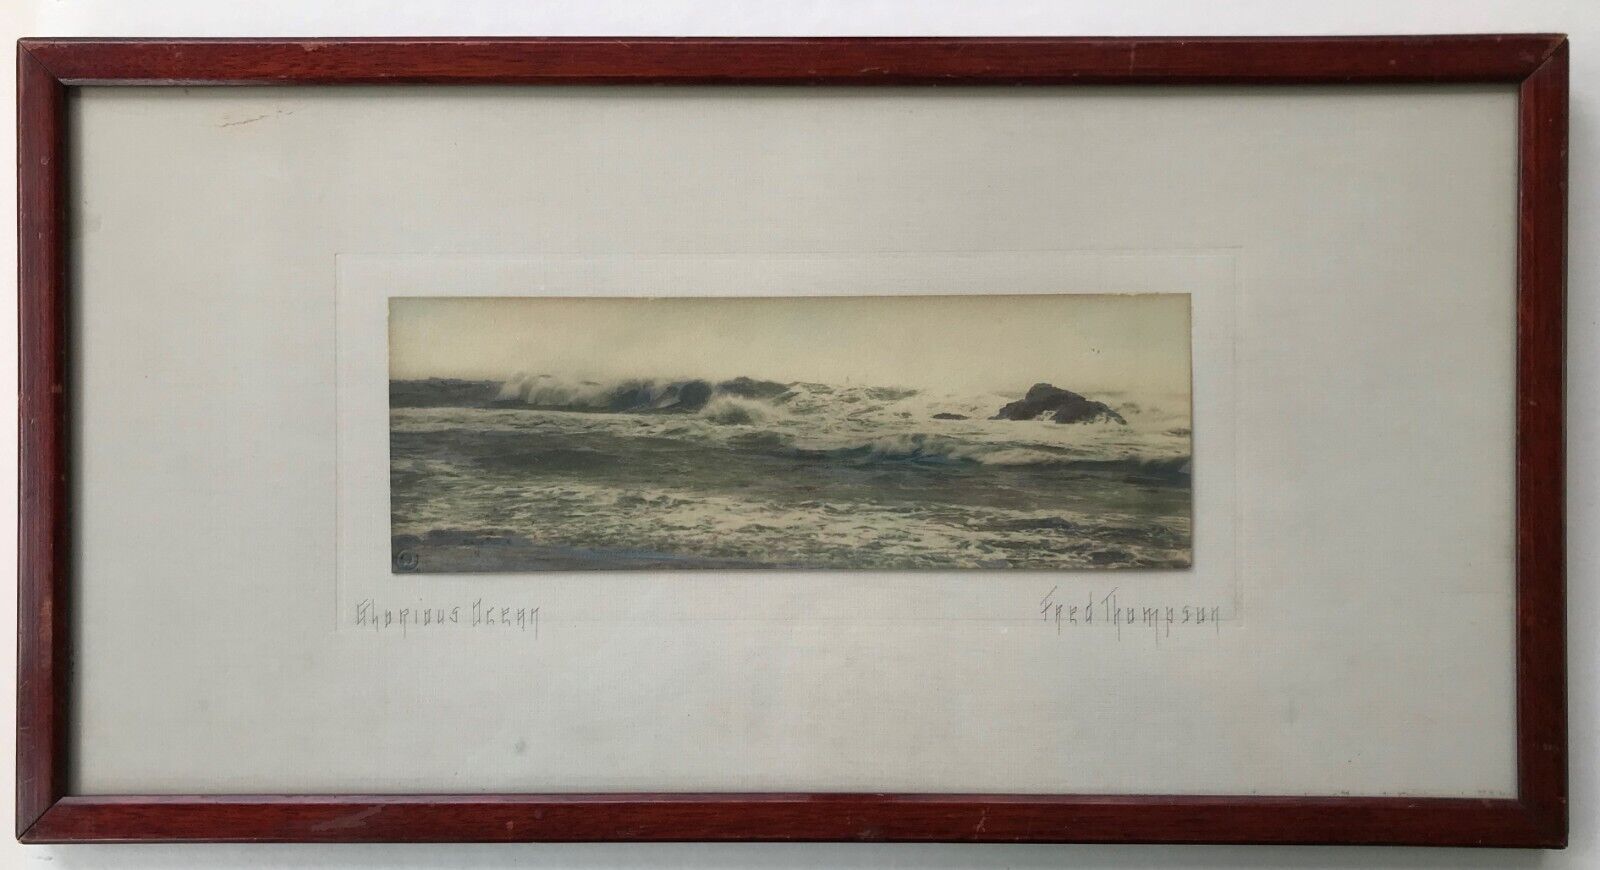 Fred Thompson Signed Framed GLORIOUS OCEAN Hand Tinted Photo Vintage